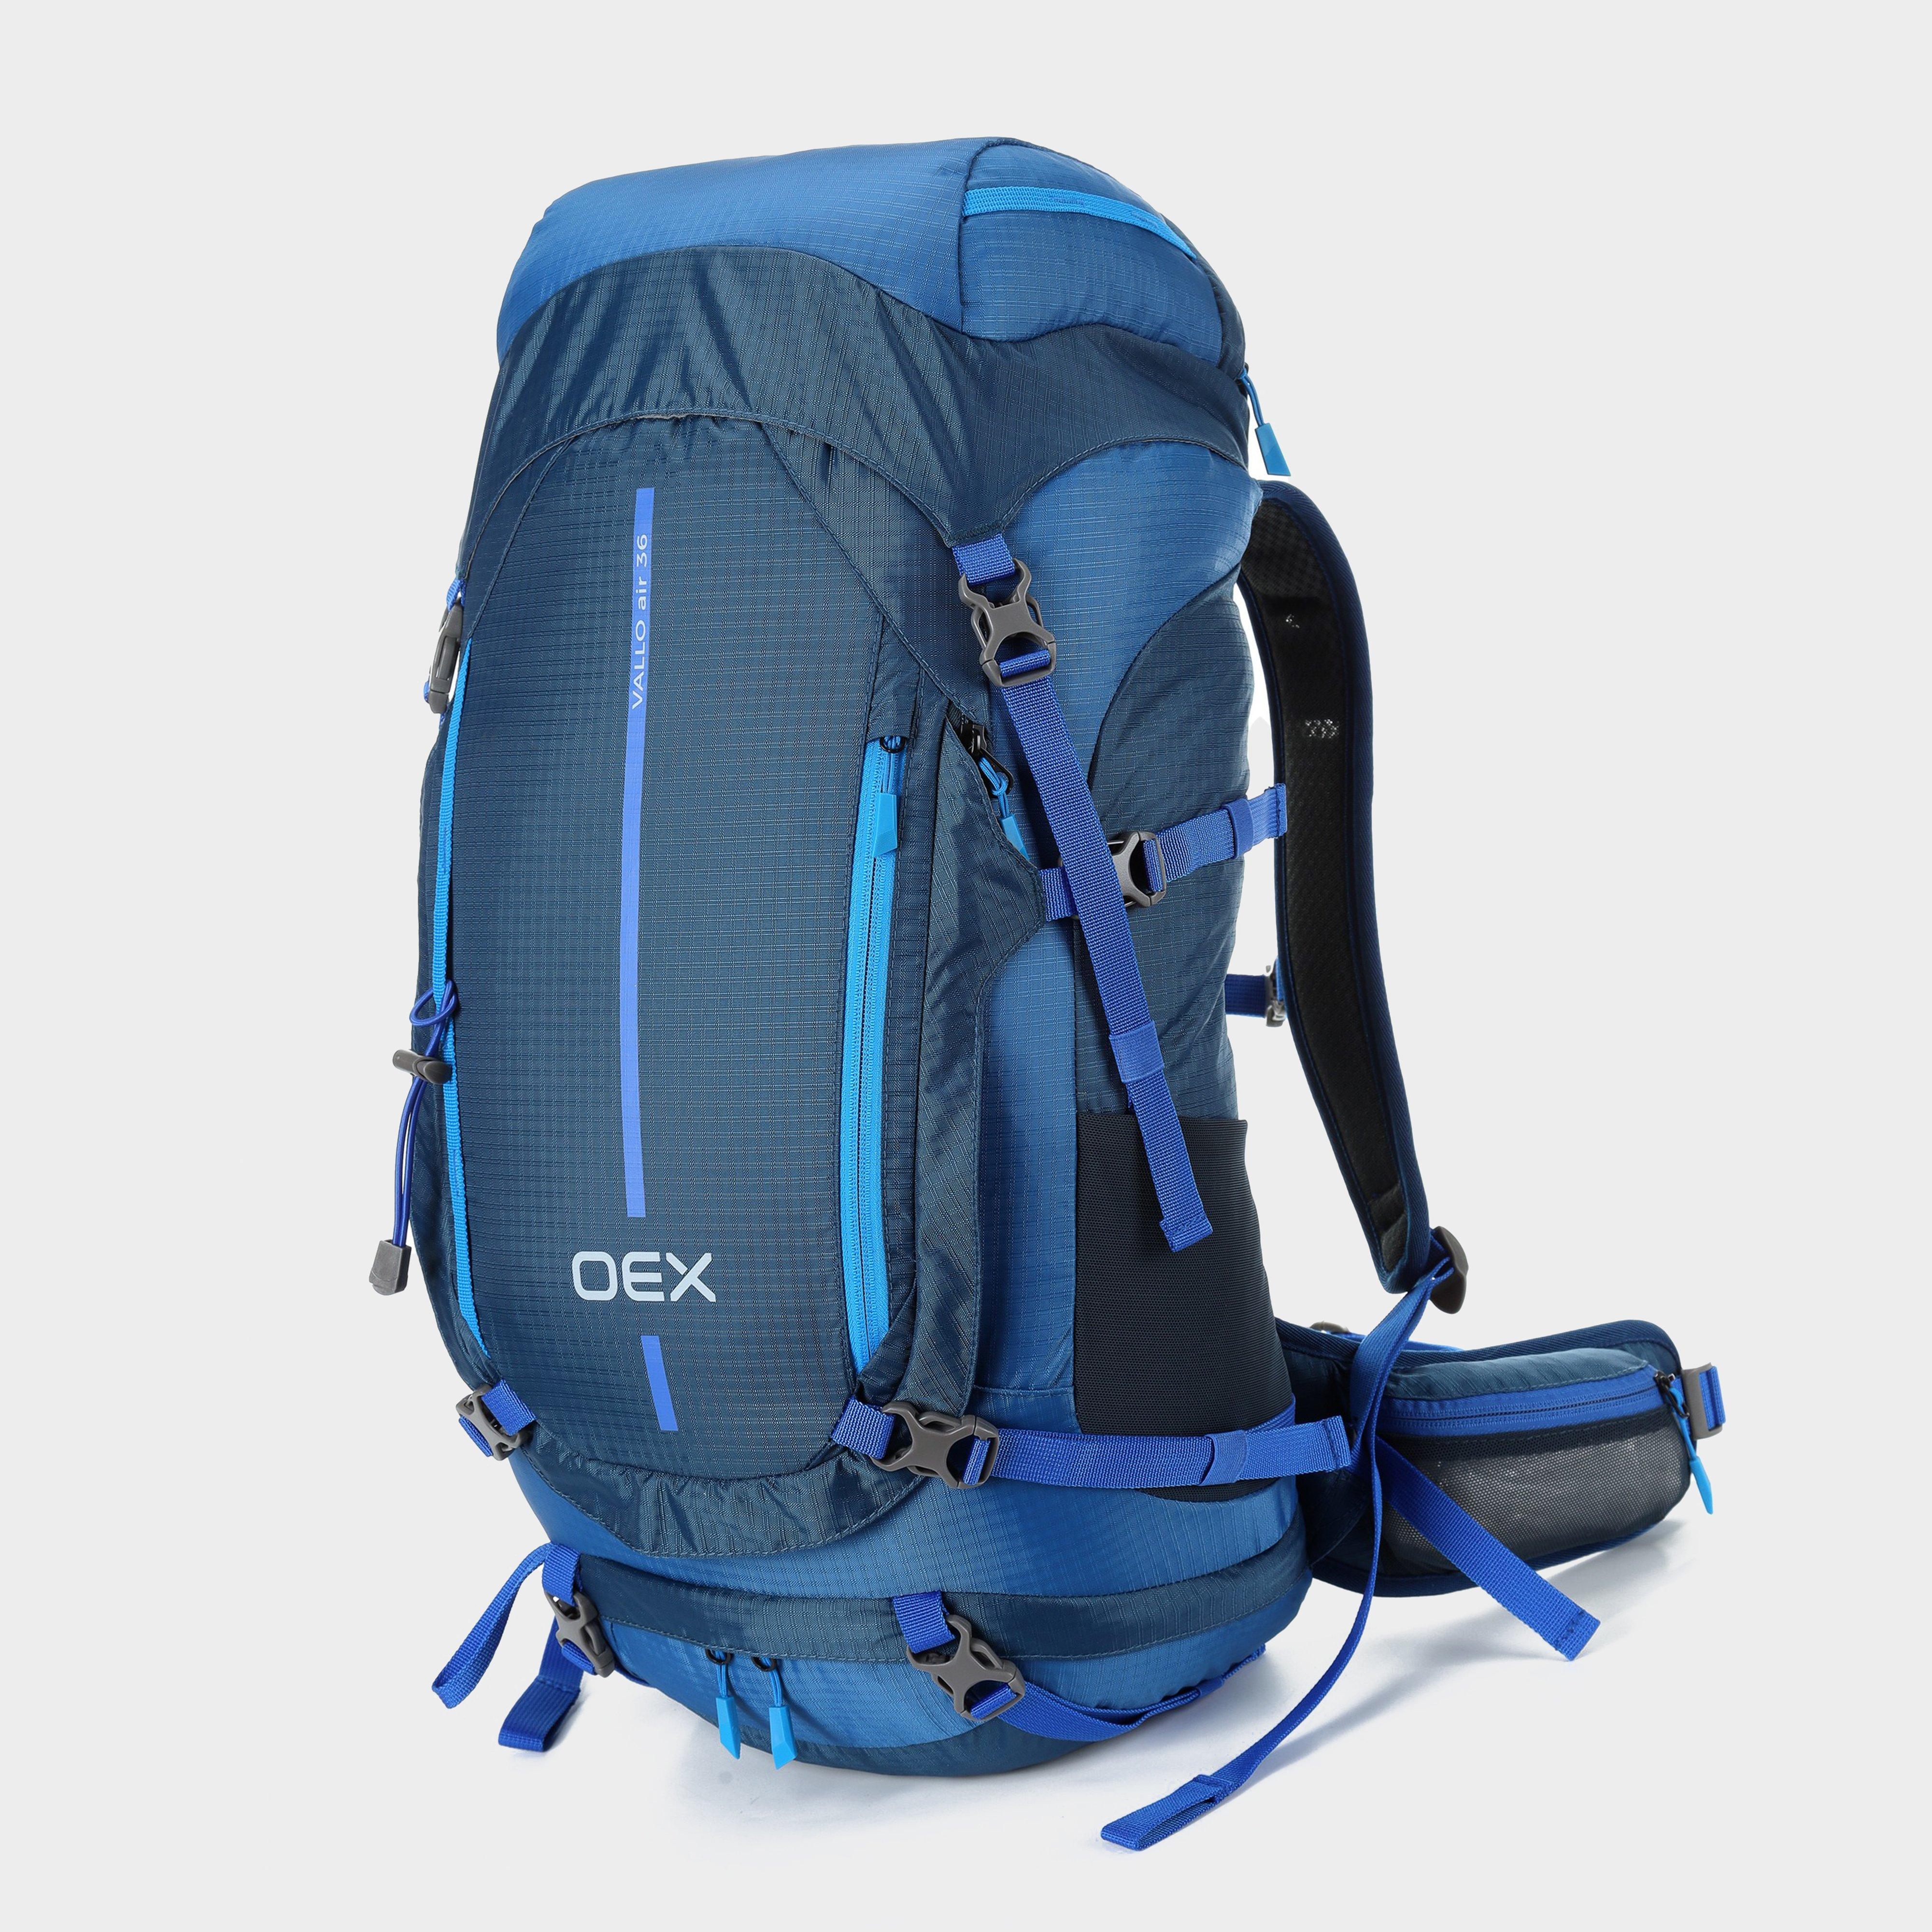 OEX VALLO AIR Review